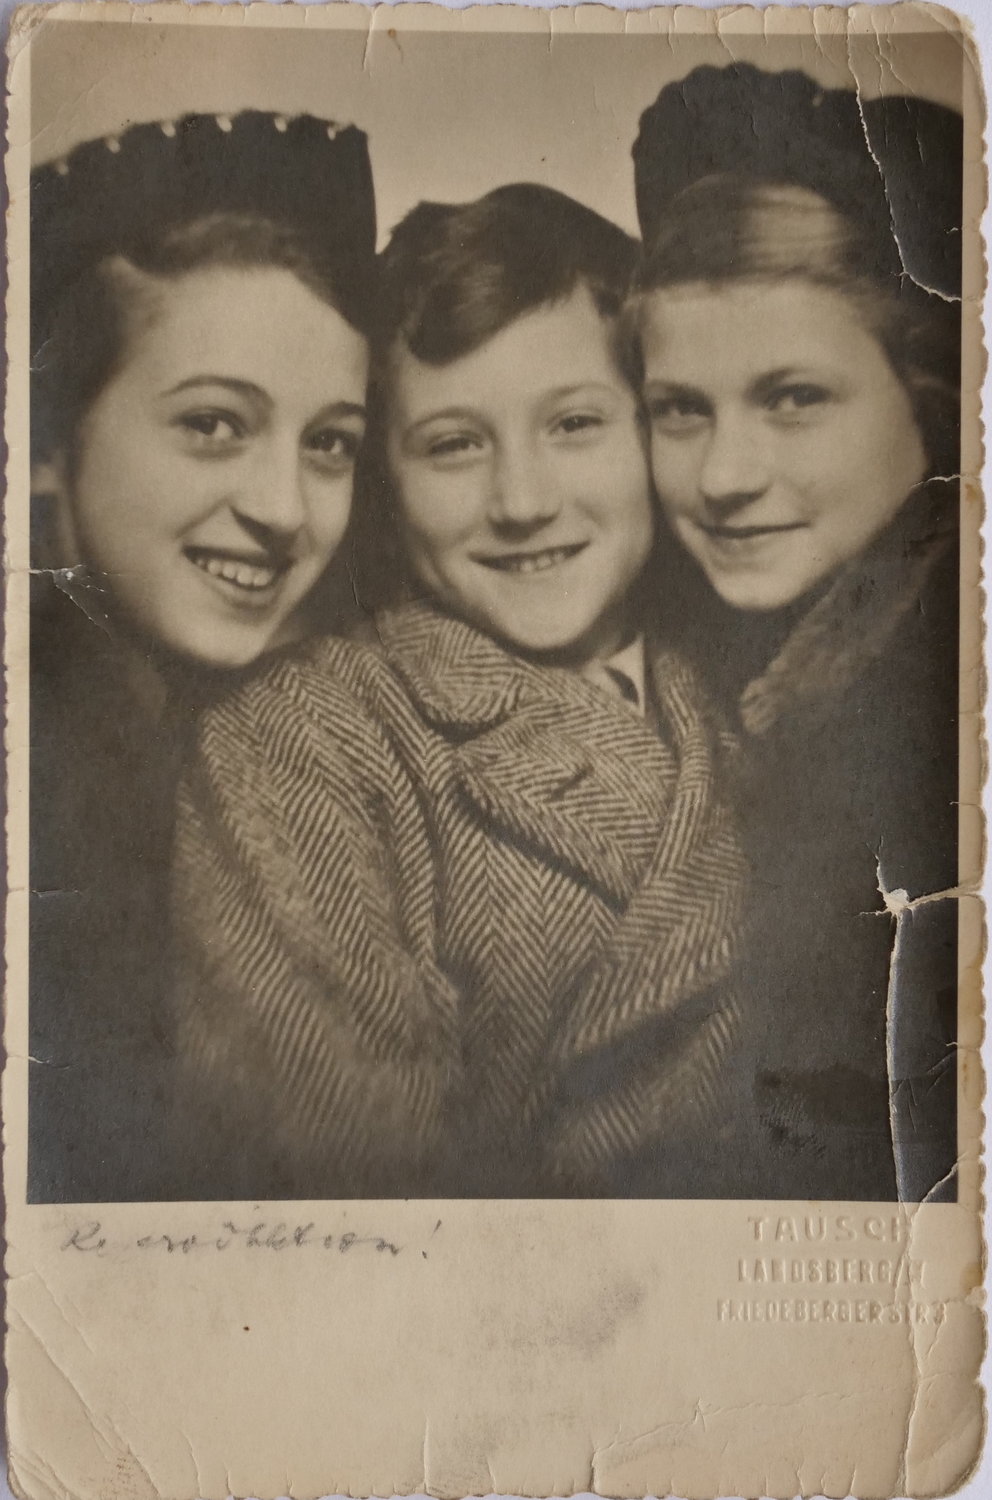 From left, Cele, Herb and Margaret Gildin were split up and sent to live with non-Jewish families in Sweden from Germany in 1939.